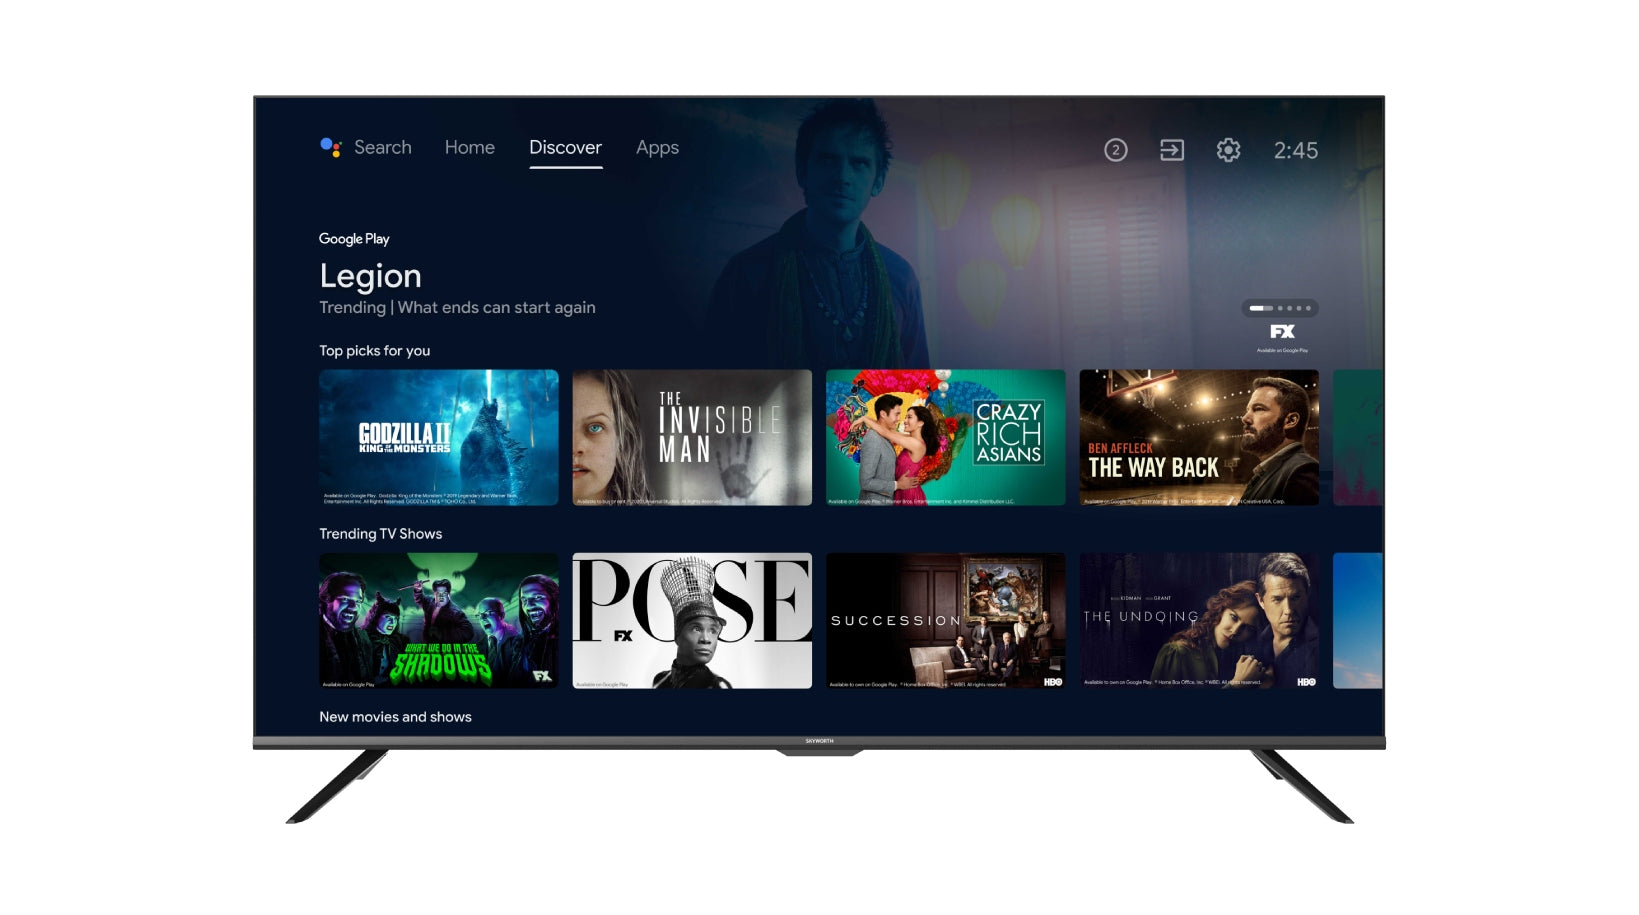 UC7500 Series 4K Android TV – North America